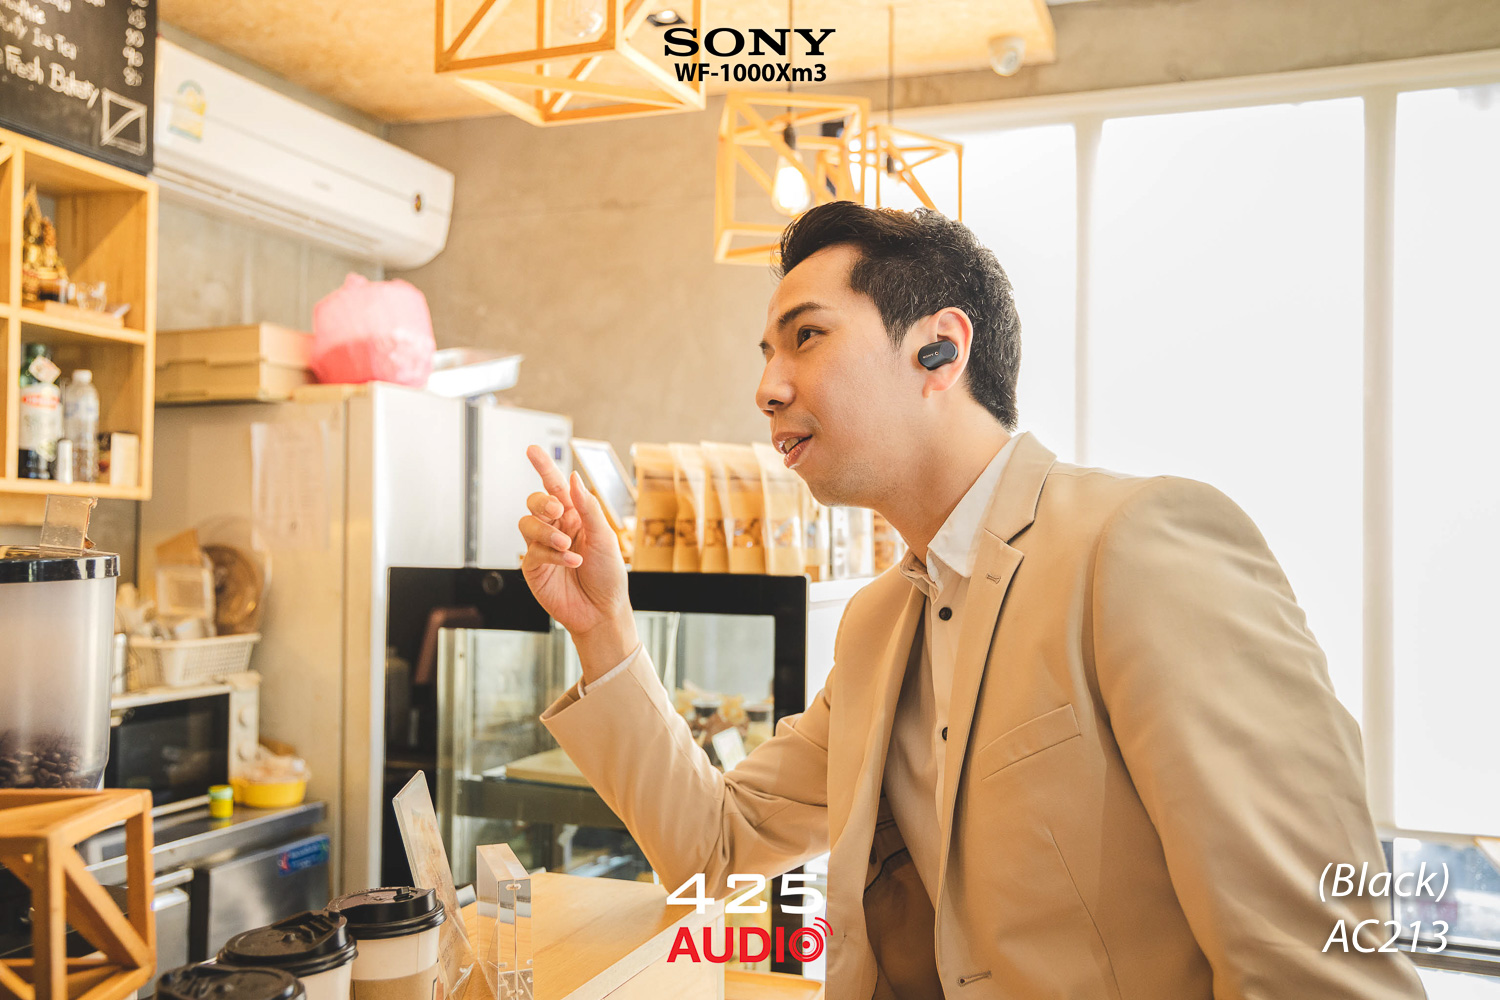 Sony,true,wireless,bluetooth,5.0,noise,cancelling,hi,end,WF-1000xm3,aac,dsee,hx,black,silver